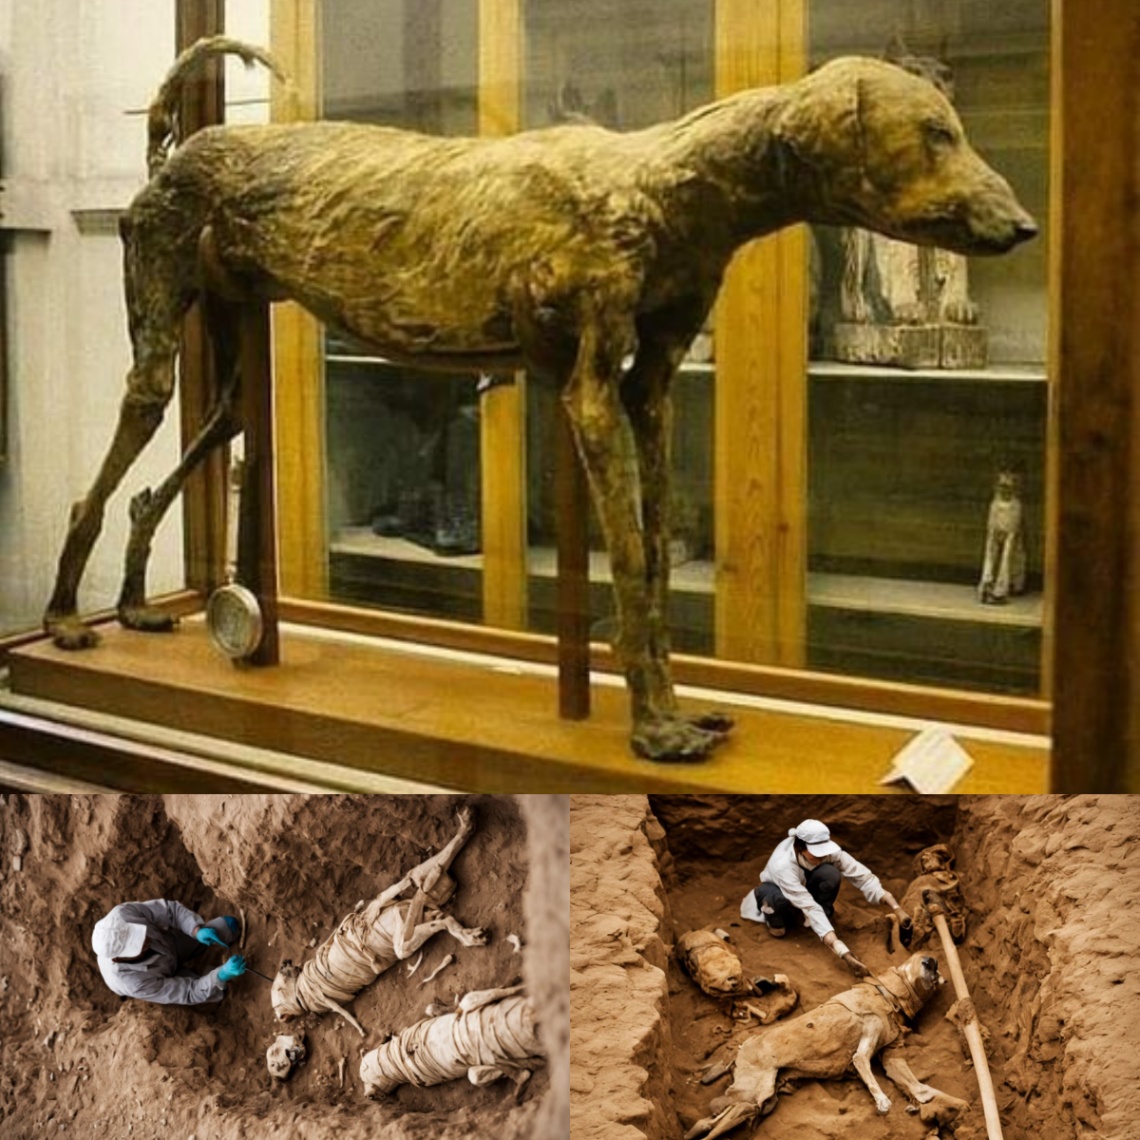 Mυmmy of a 3,500-year-old dog, It was the little dog of Pharaoh Ameпhotep from 1427 BC.